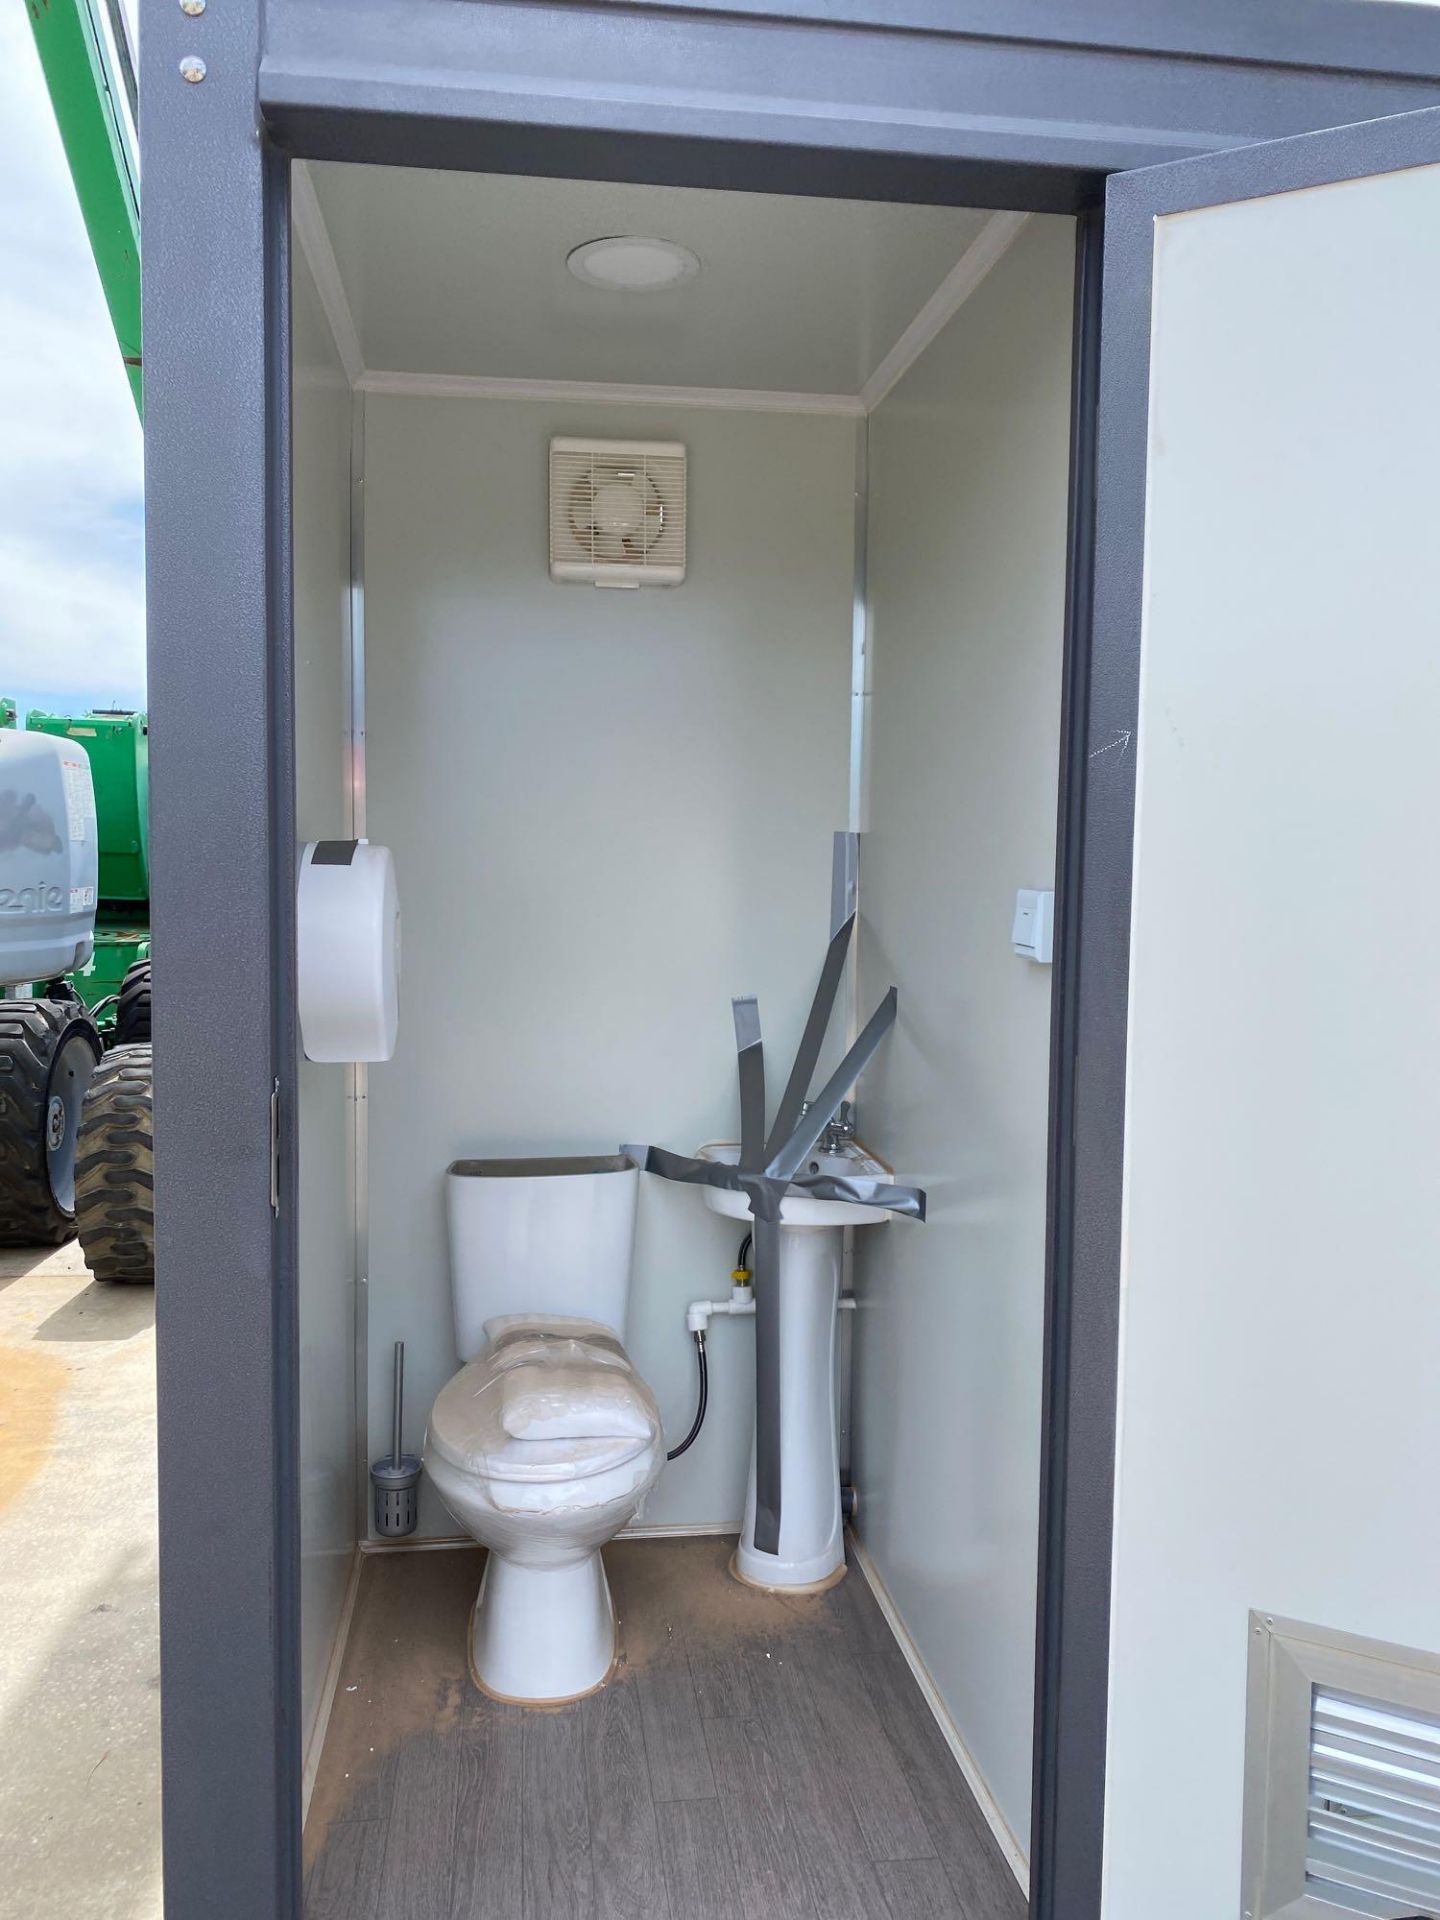 NEW/UNUSED DUAL STALL PORTABLE BATHROOM UNIT WITH ELECTRICAL HOOK UP AND PLUMBING, SINKS, LIGHTS - Image 6 of 9